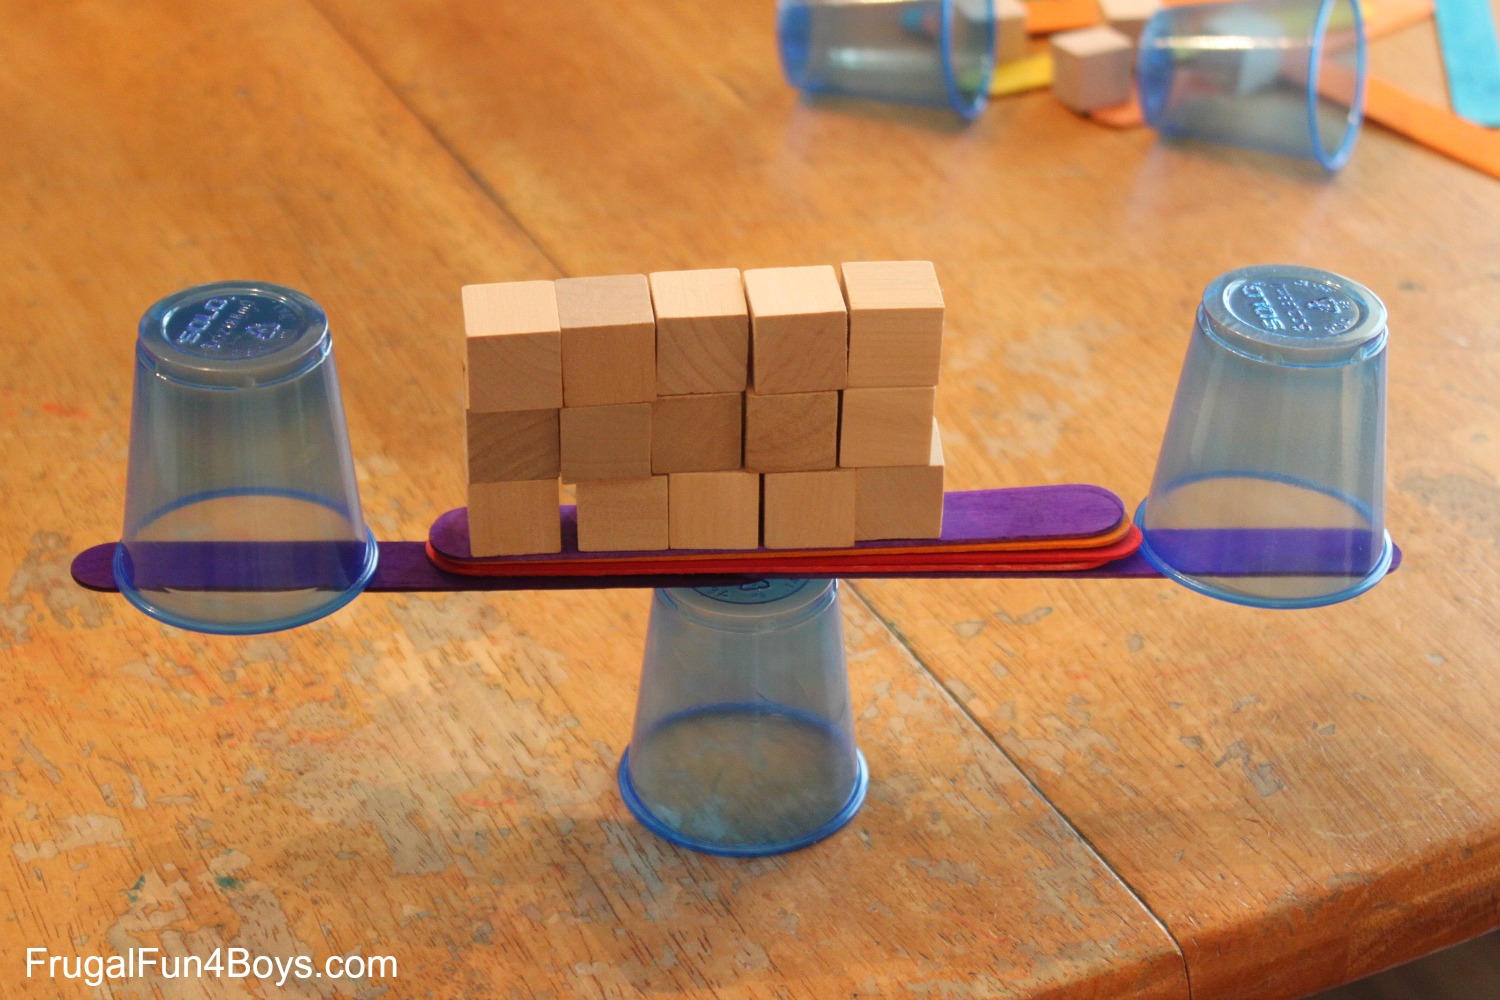 4 Engineering Challenges for Kids